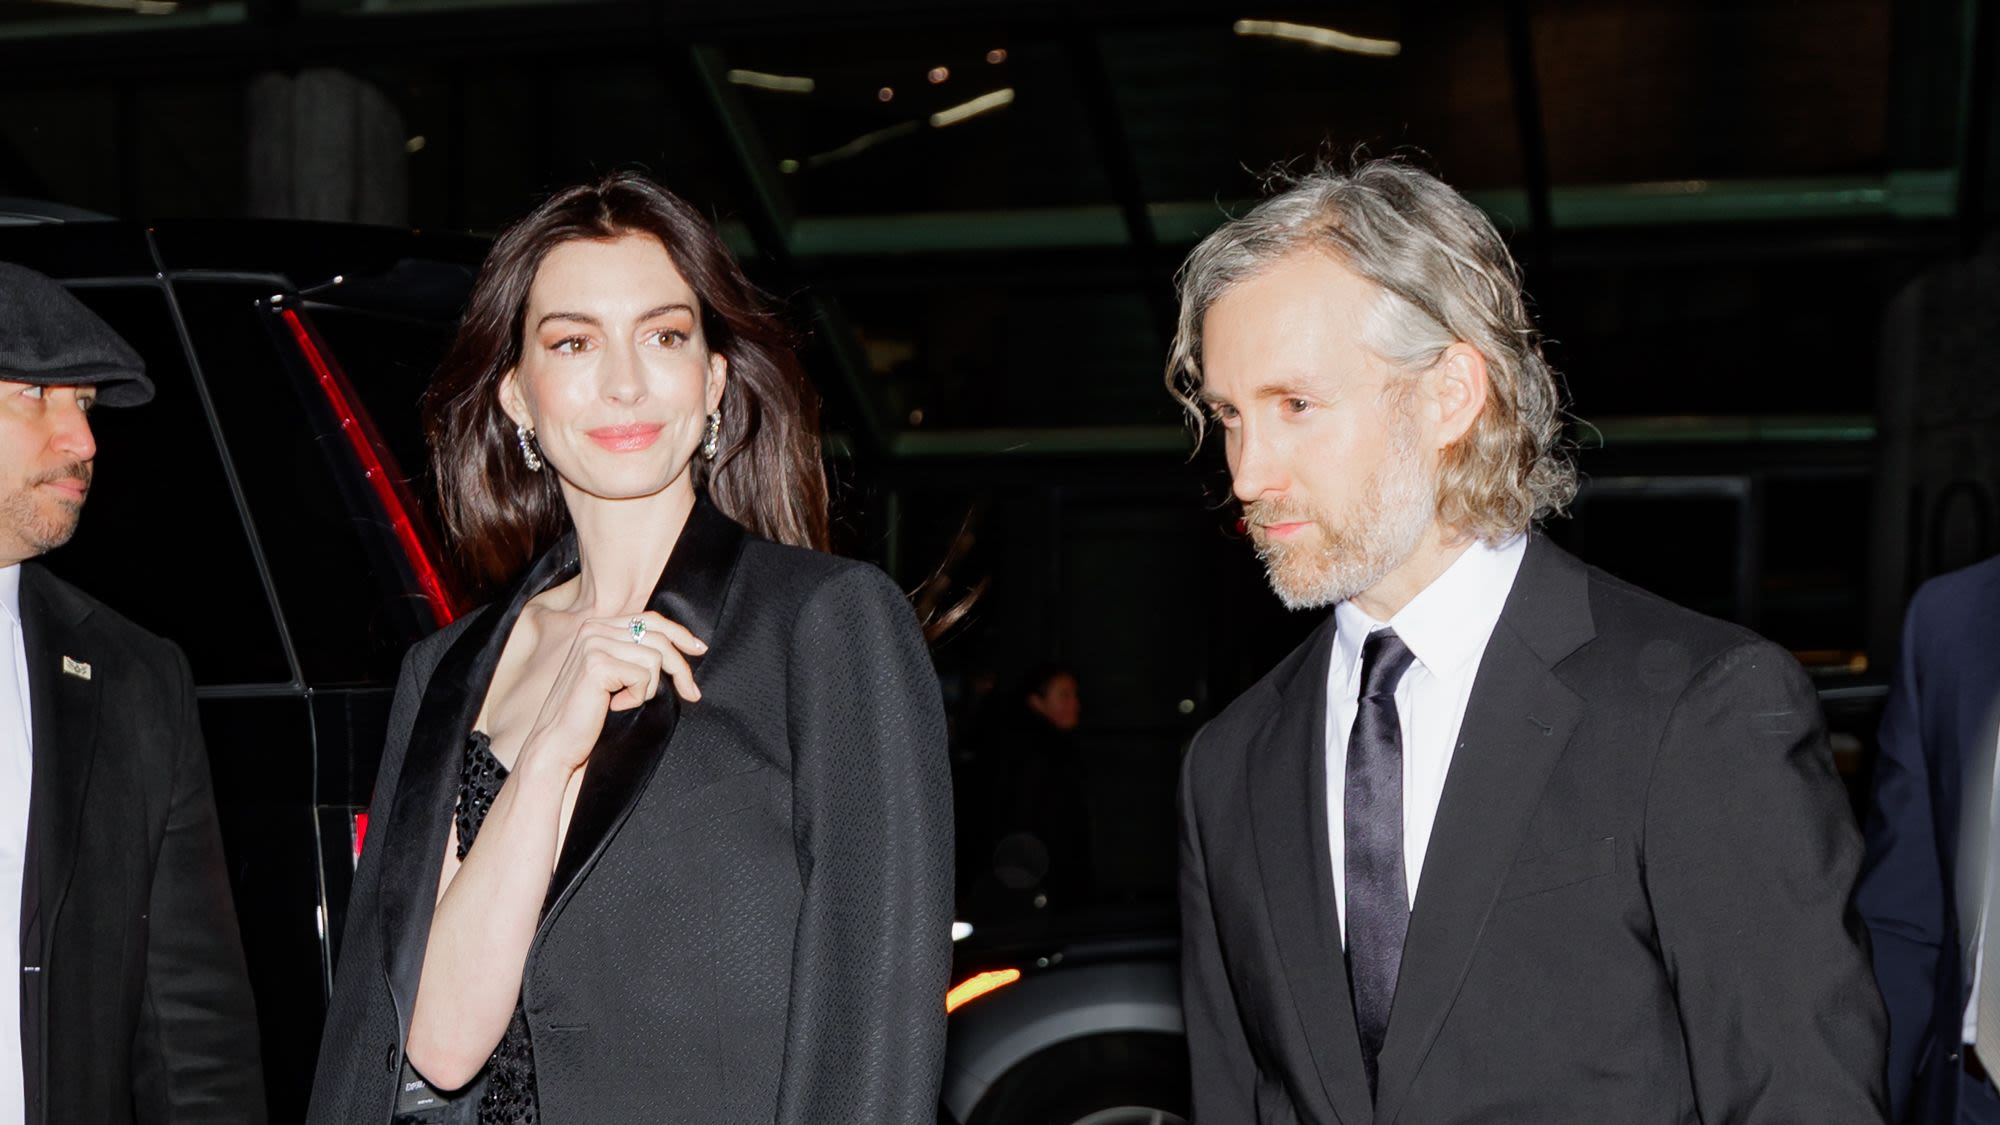 Anne Hathaway Held Hands With Her Husband, Adam Shulman, After ‘The Idea of You’ Screening